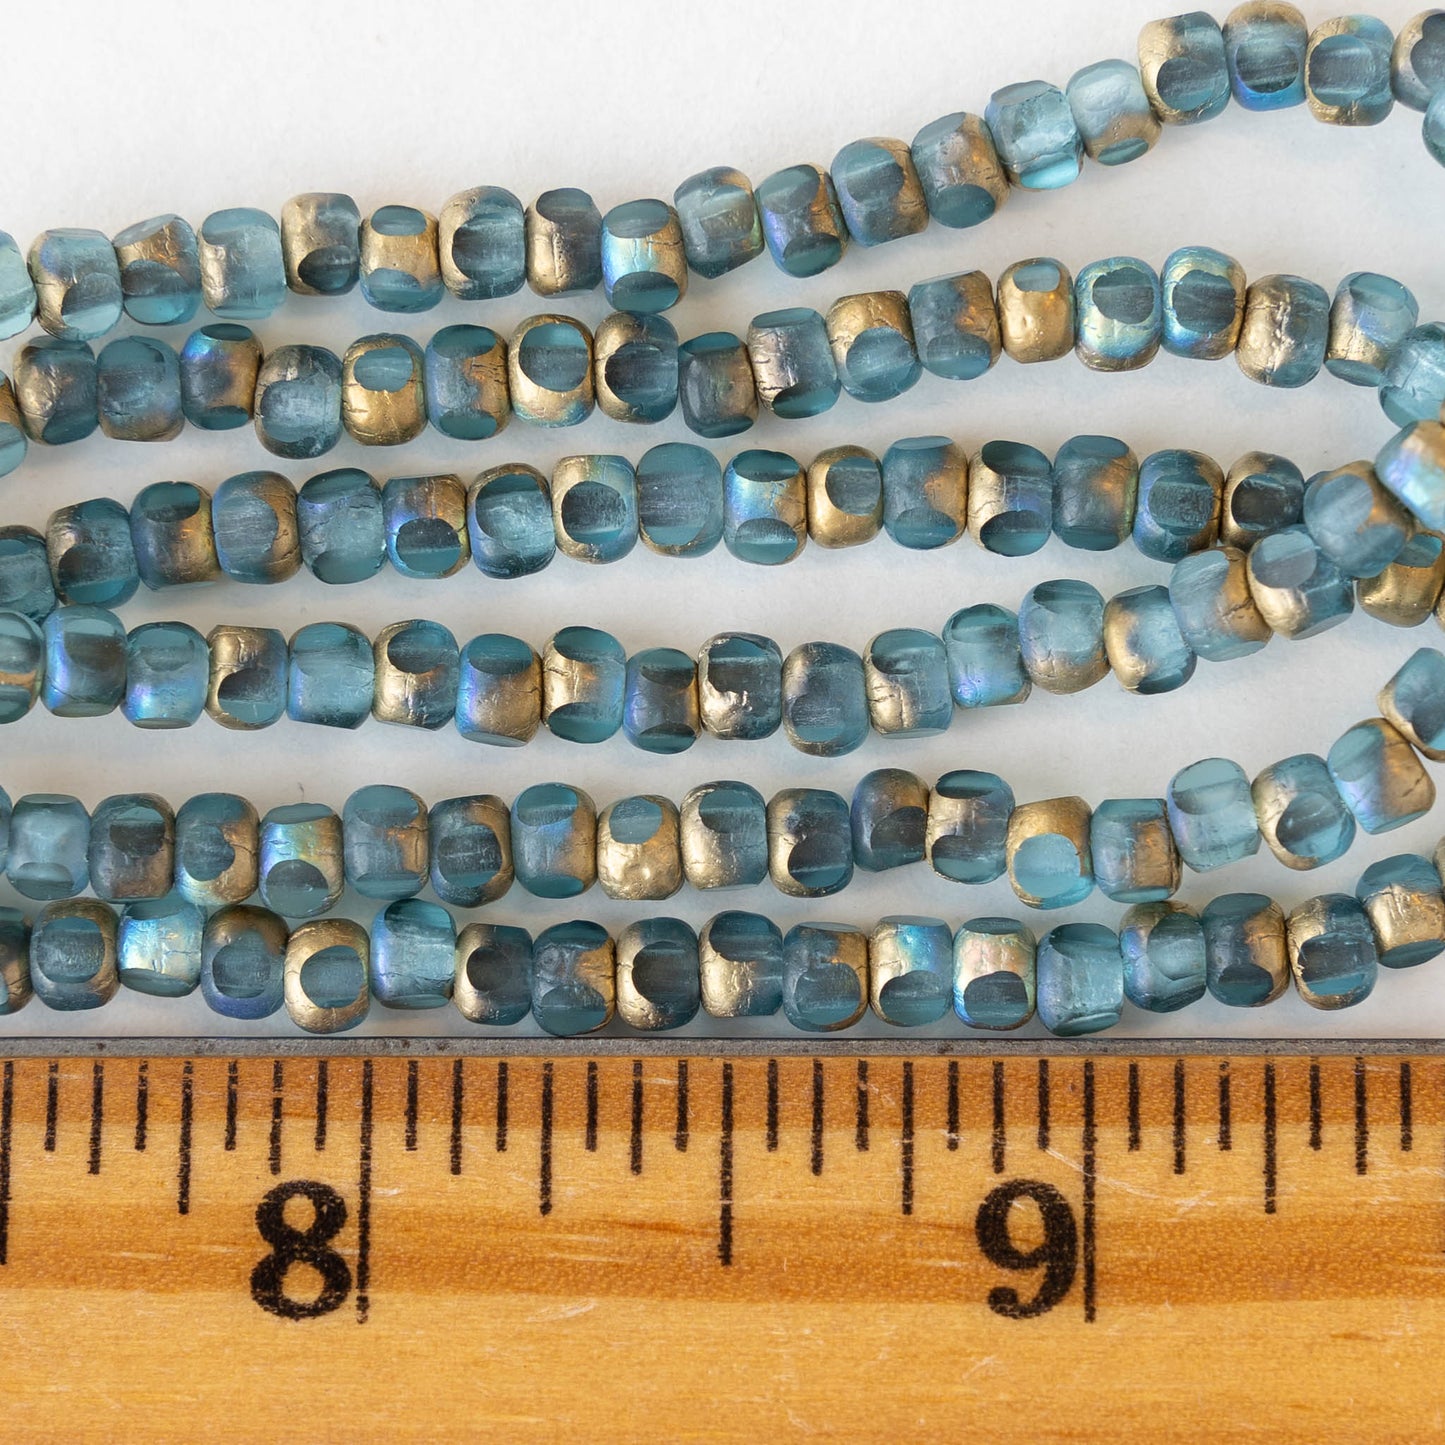 6/0 Tri-cut Seed Beads - Light Blue with an Etched Gold Finish - 50